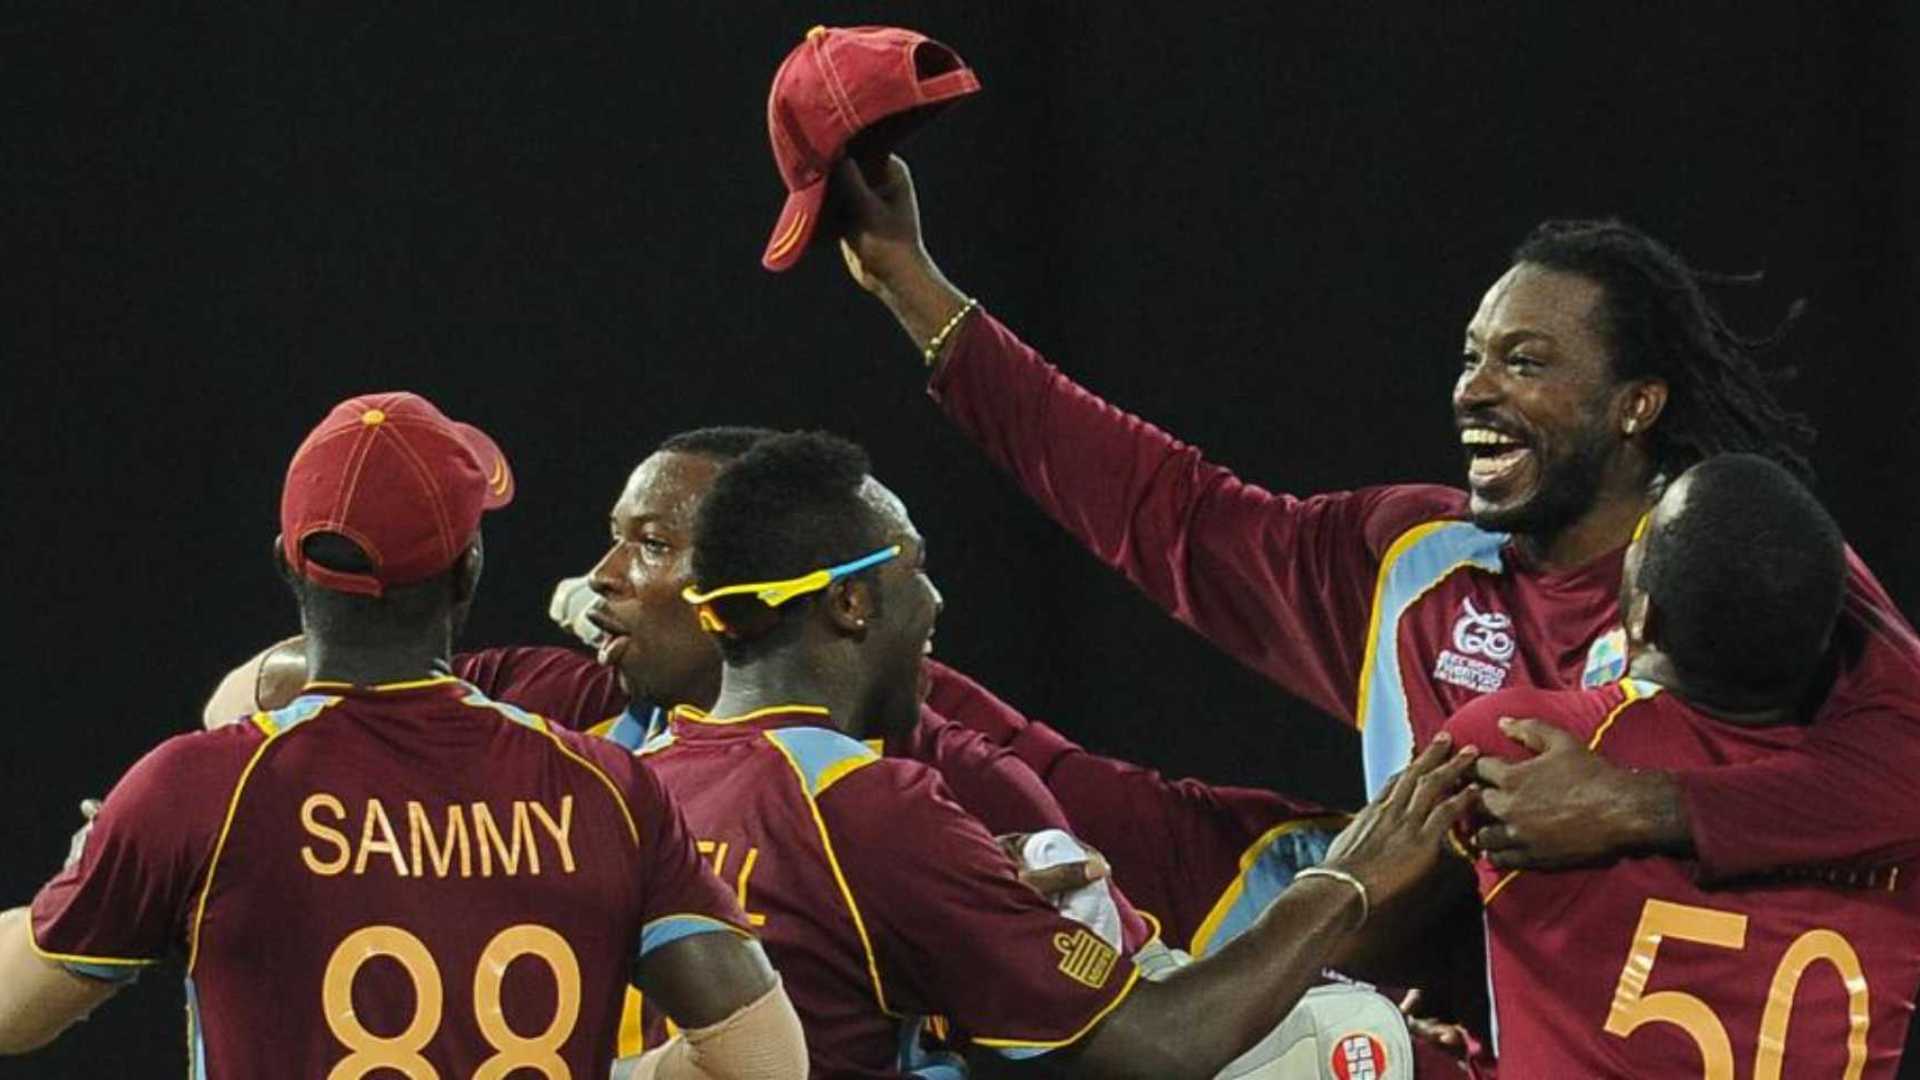 West Indies team won the T20 World Cup in 2016. (Image credit: ICC/Twitter)